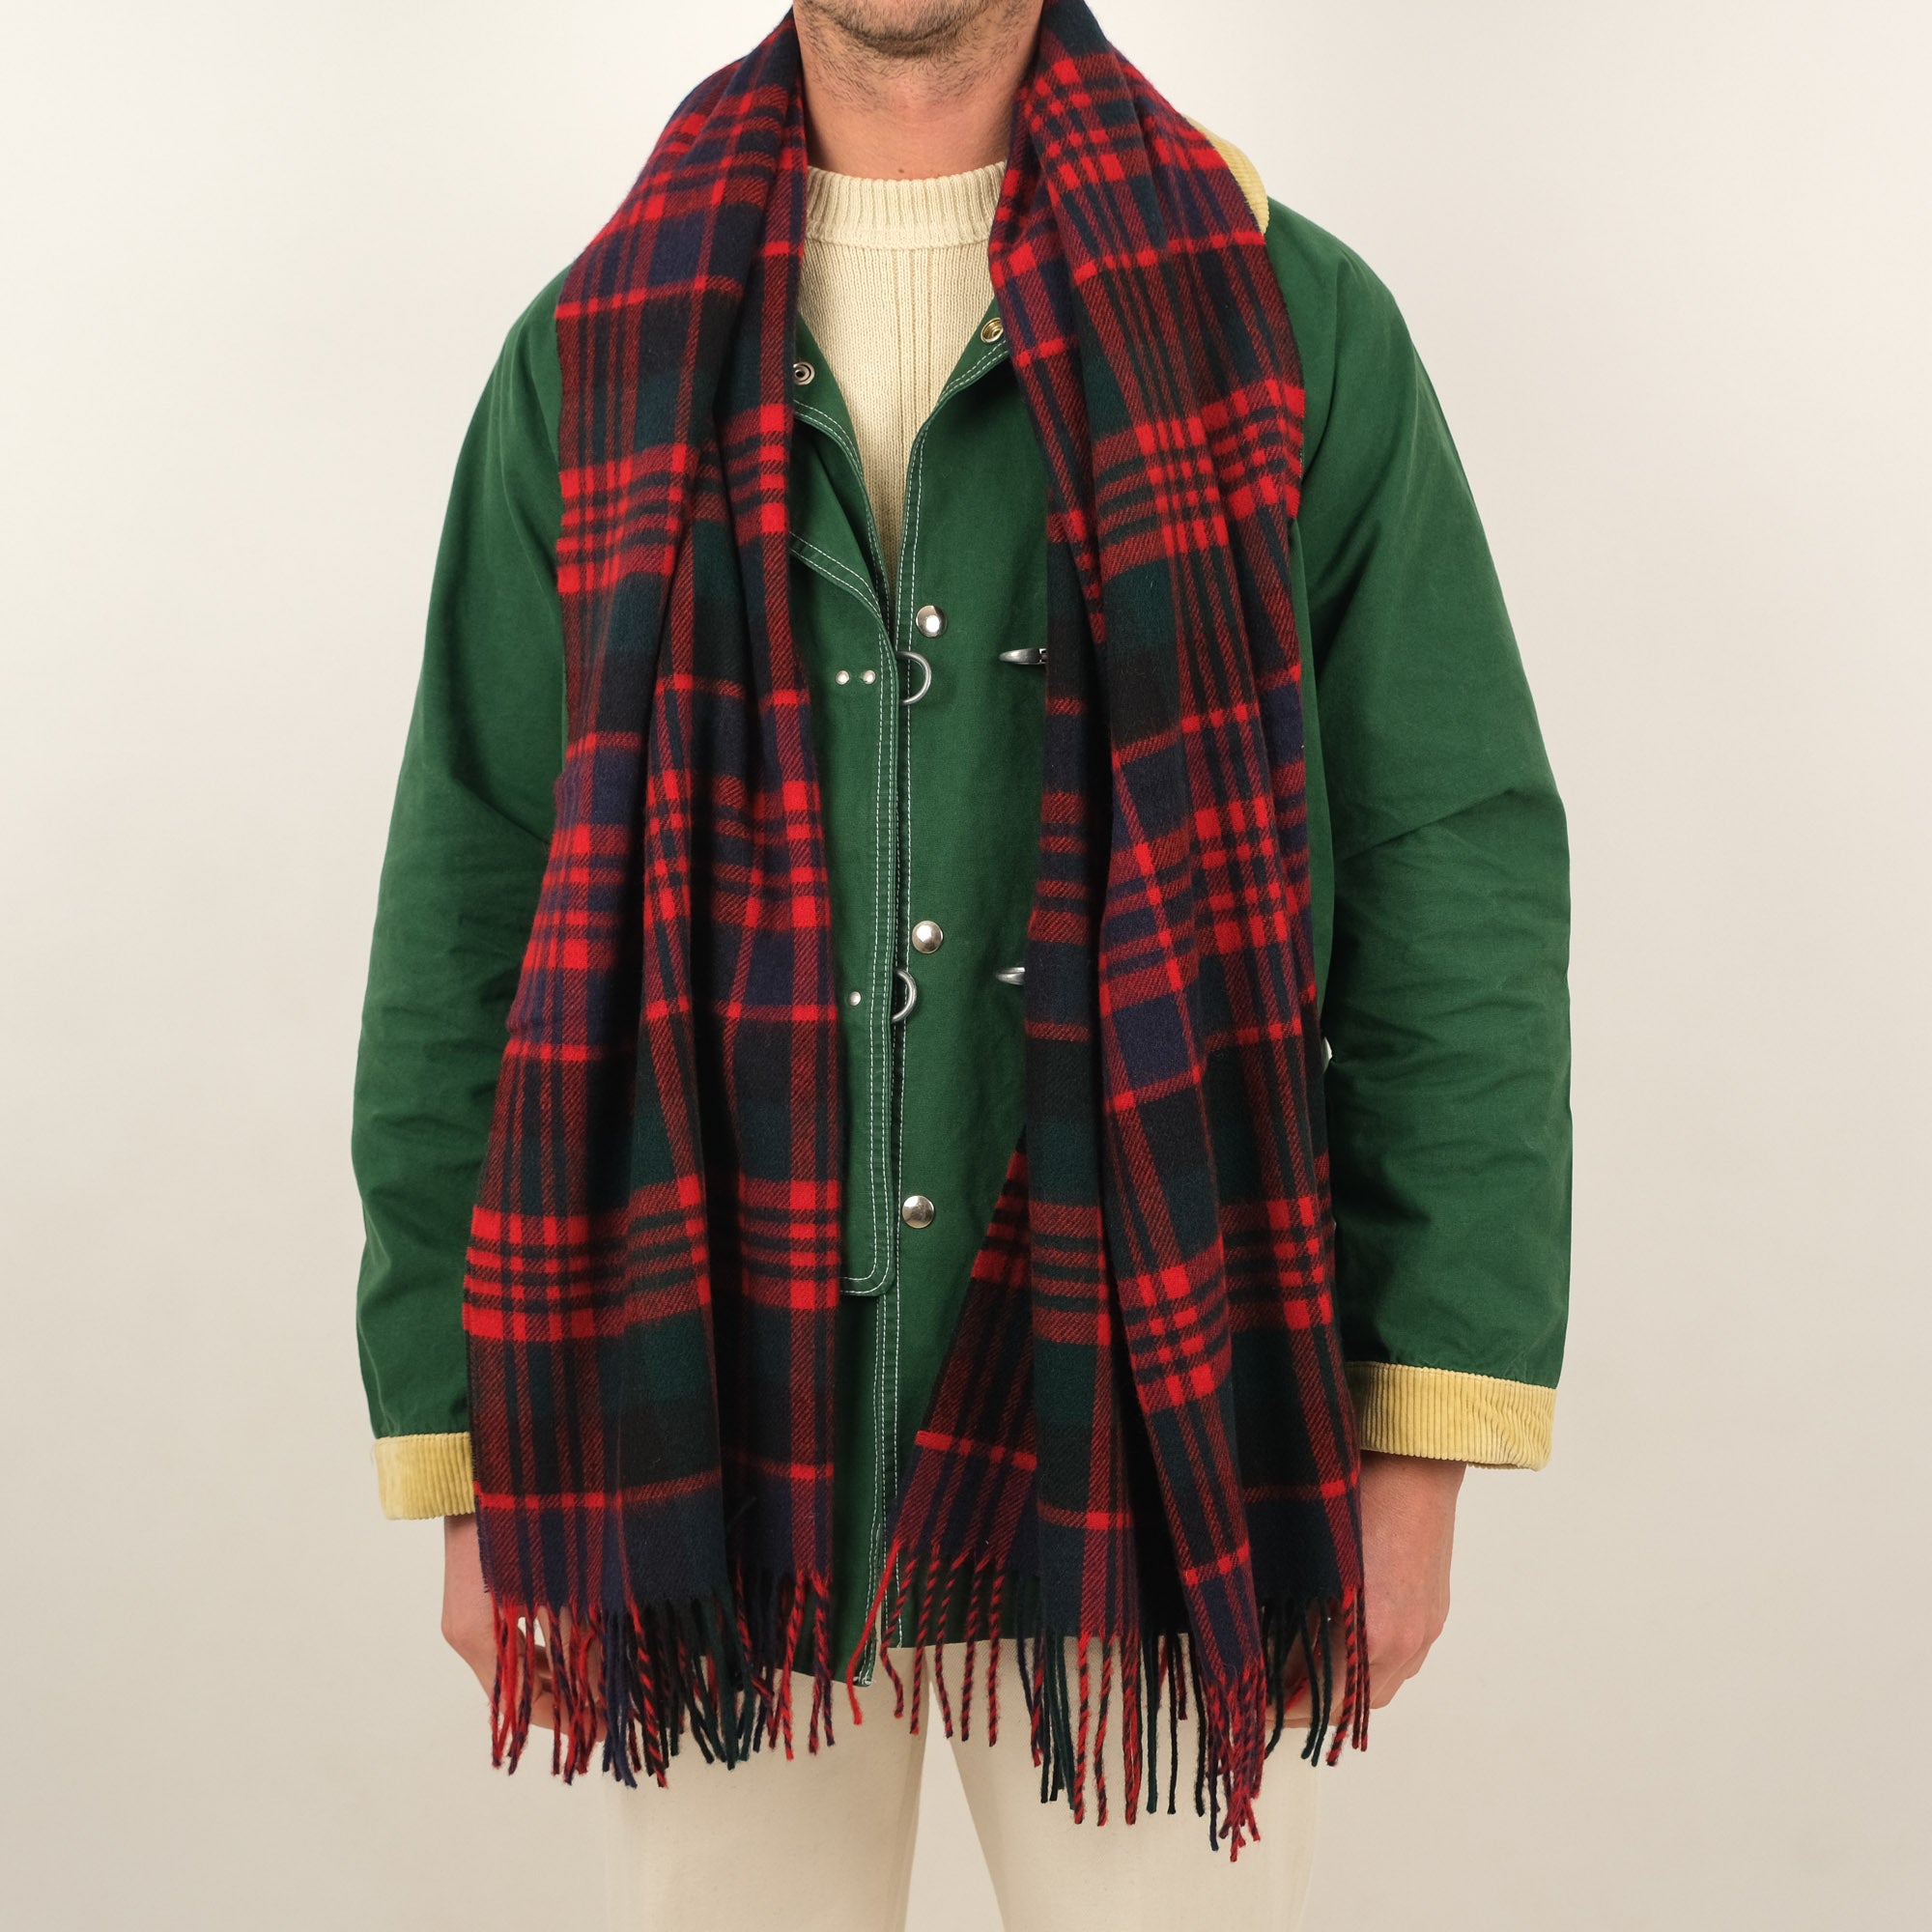 RED x NAVY x GREEN - STOLE - BRUT Clothing